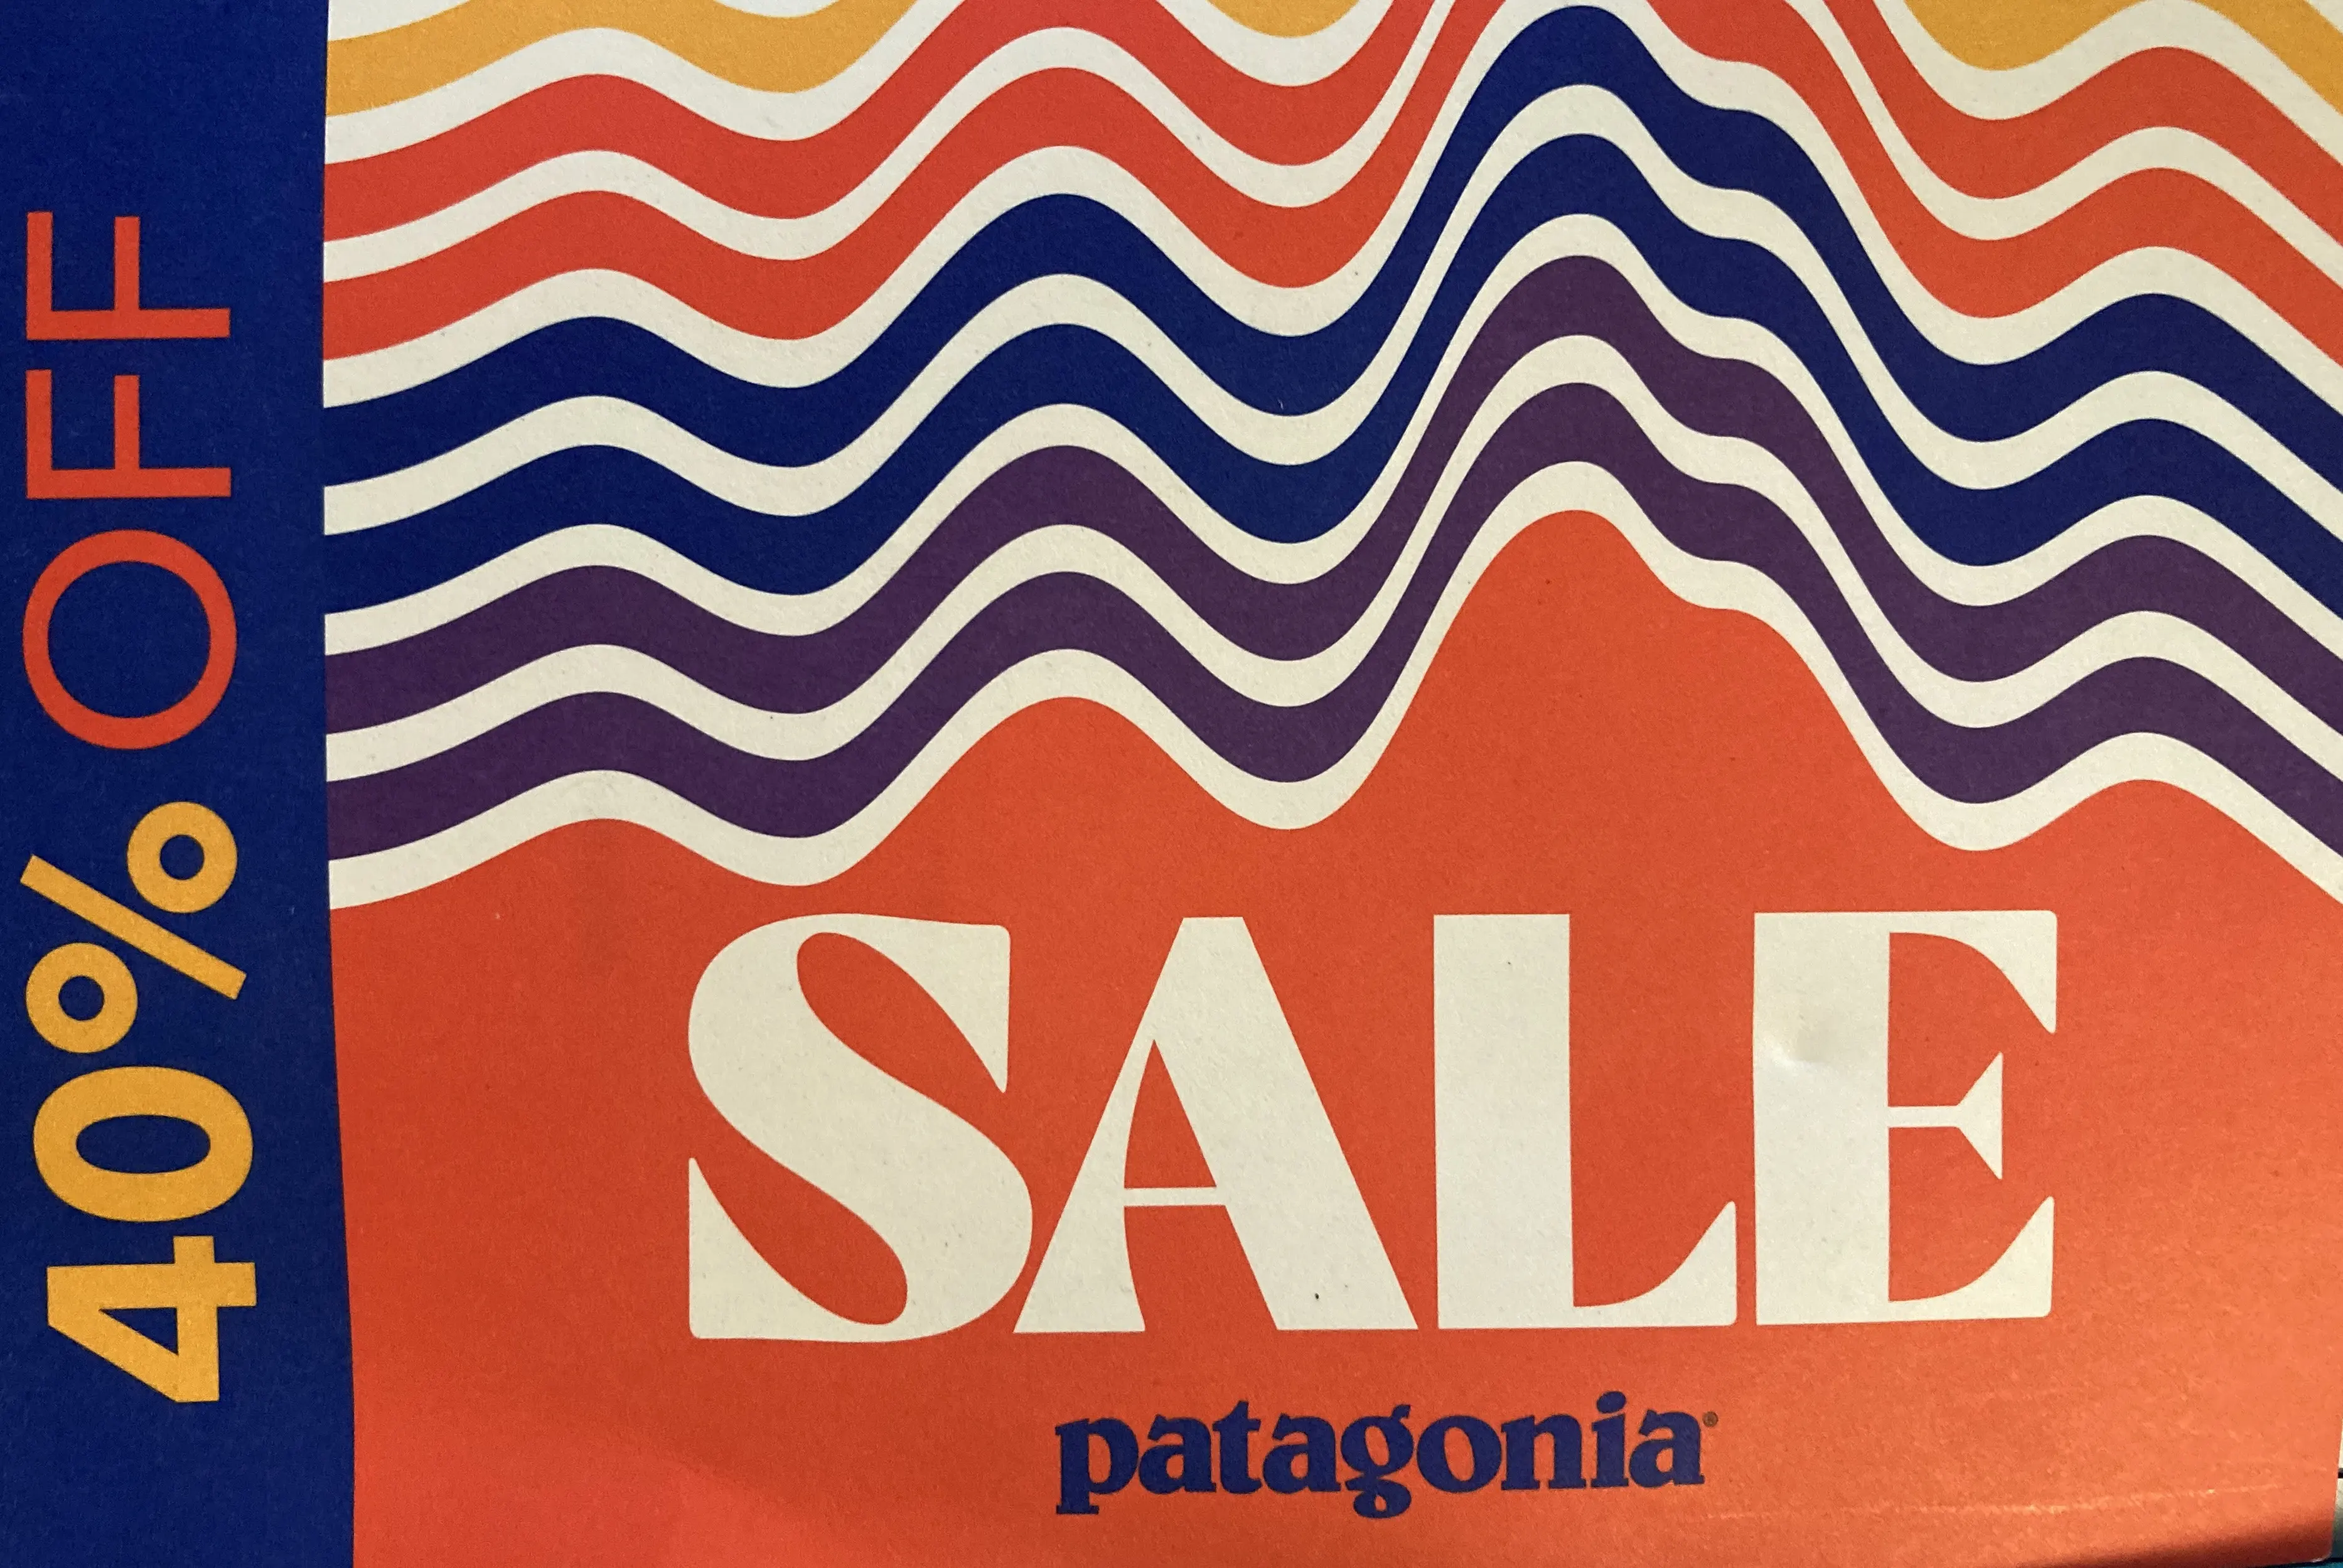 Patagonia Winter Sale: Outdoor Clothing/Gear, Equipment & More